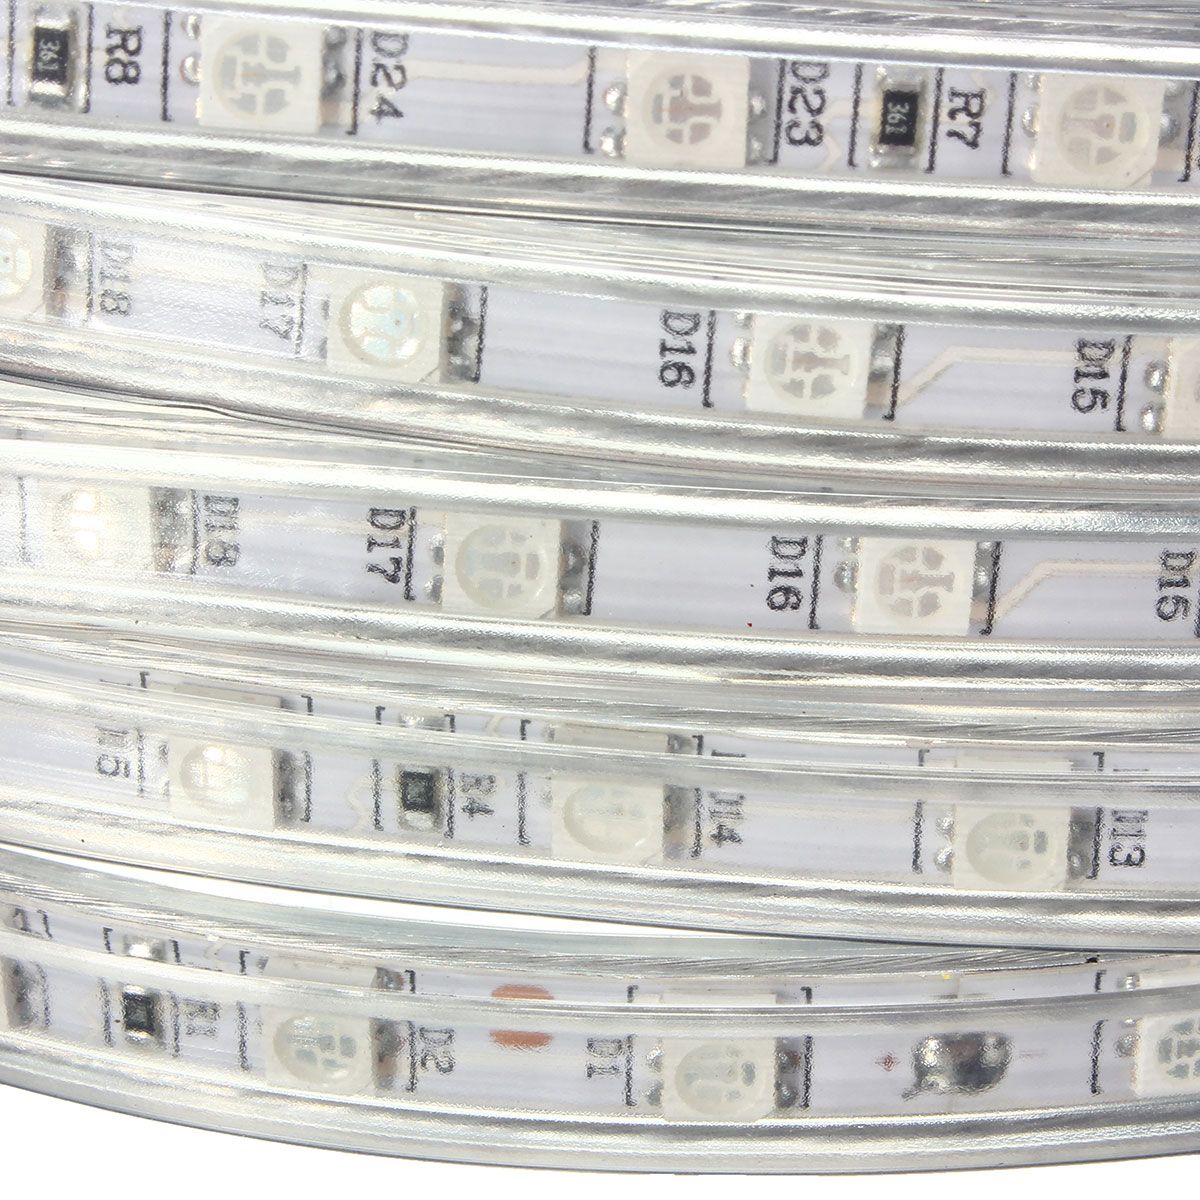 6M-5050-LED-SMD-Outdoor-Waterproof-Flexible-Tape-Rope-Strip-Light-Xmas-220V-1066362